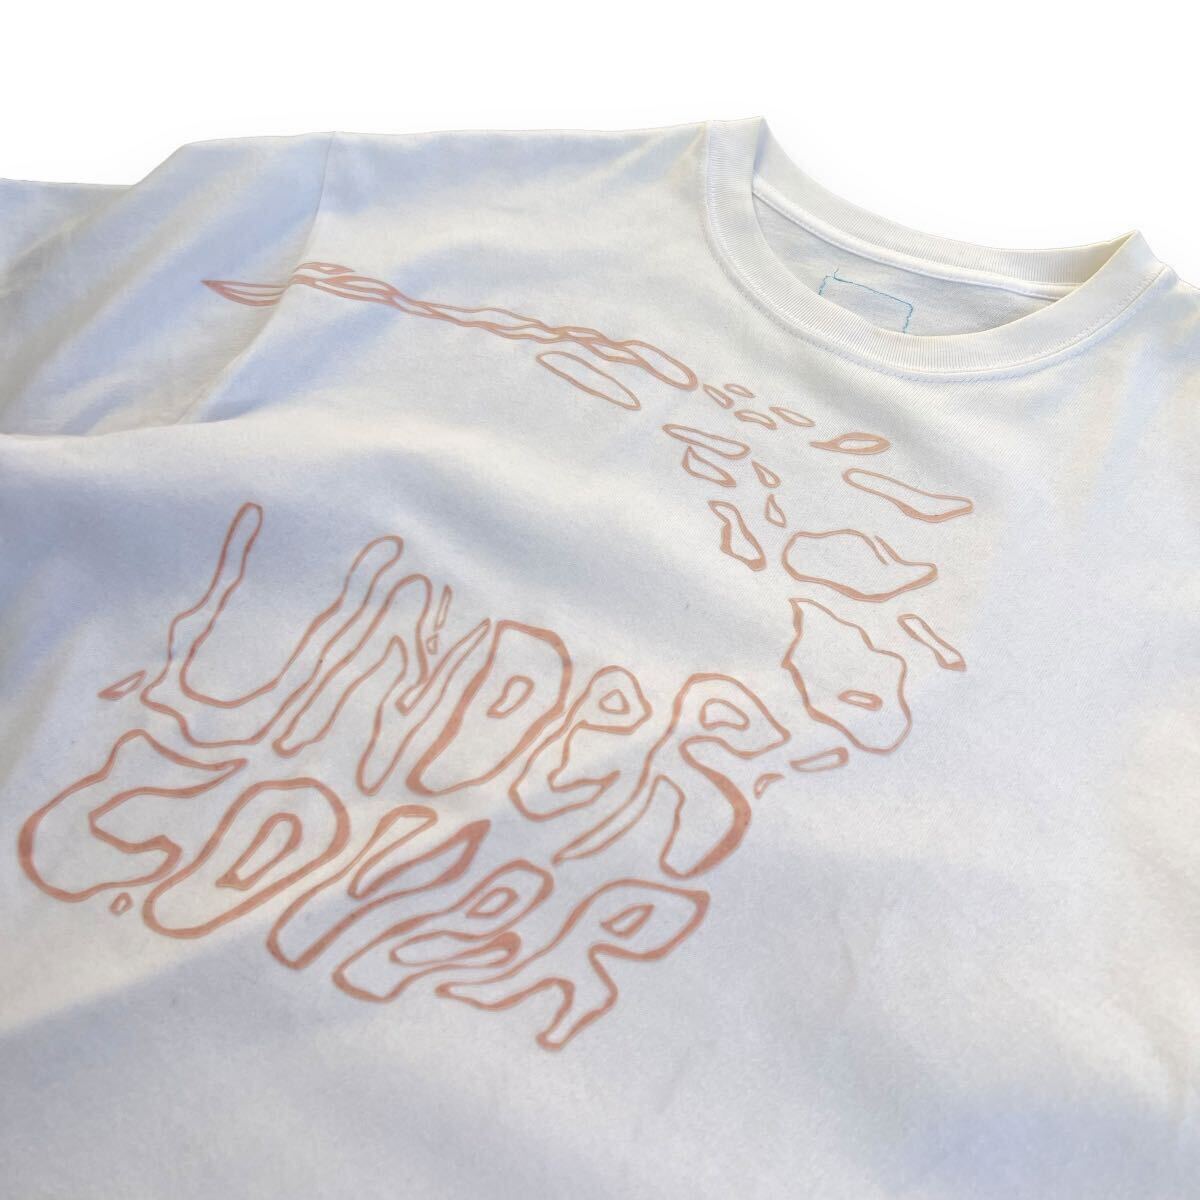 00s undercover t shirts print Jun takahashi Japanese label collection archive vintage used Japan designer